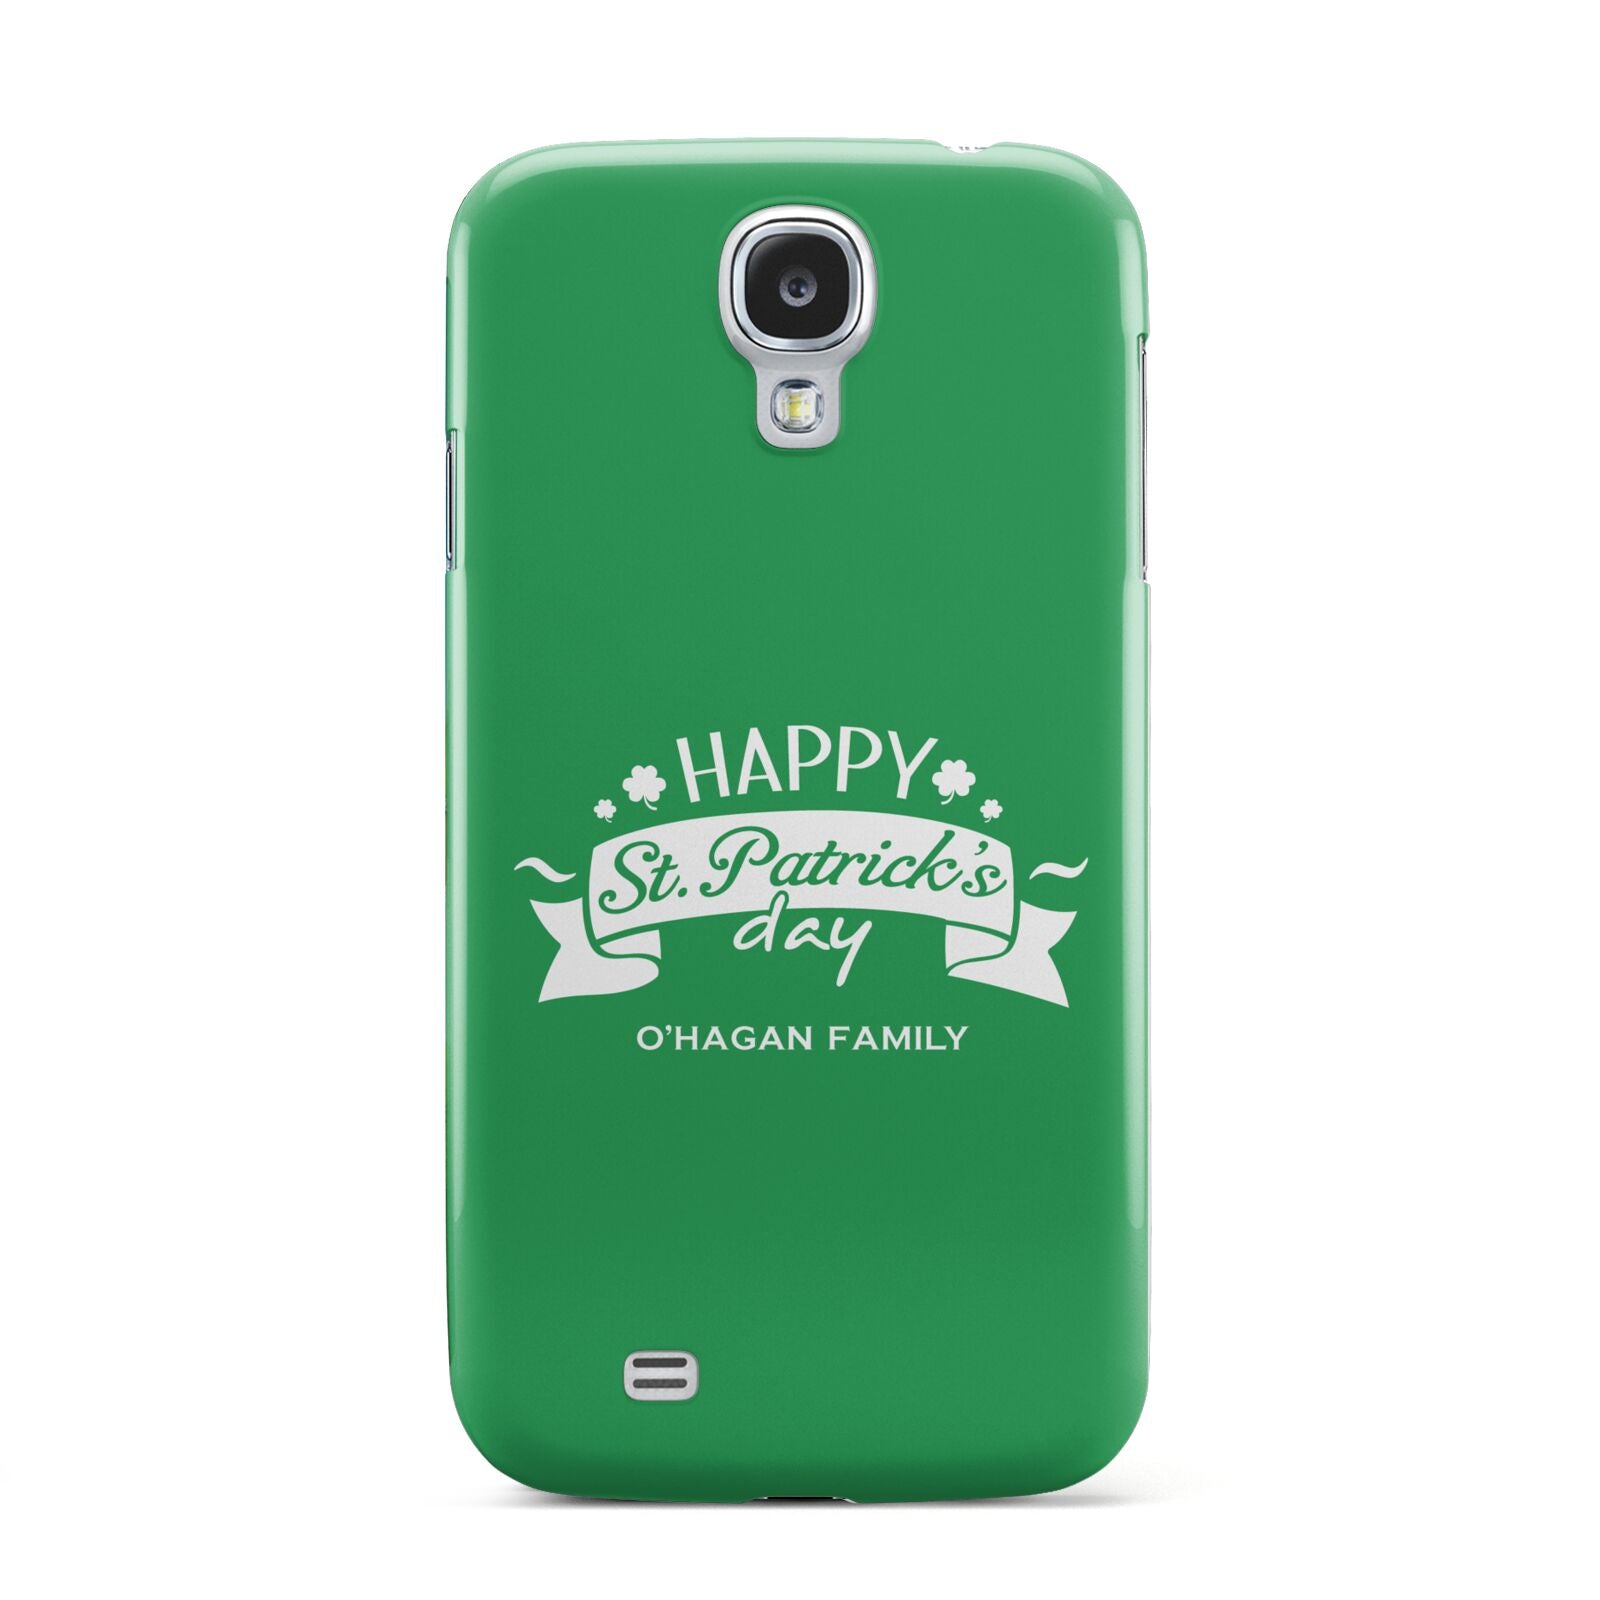 Happy St Patricks Day Personalised Samsung Galaxy S4 Case